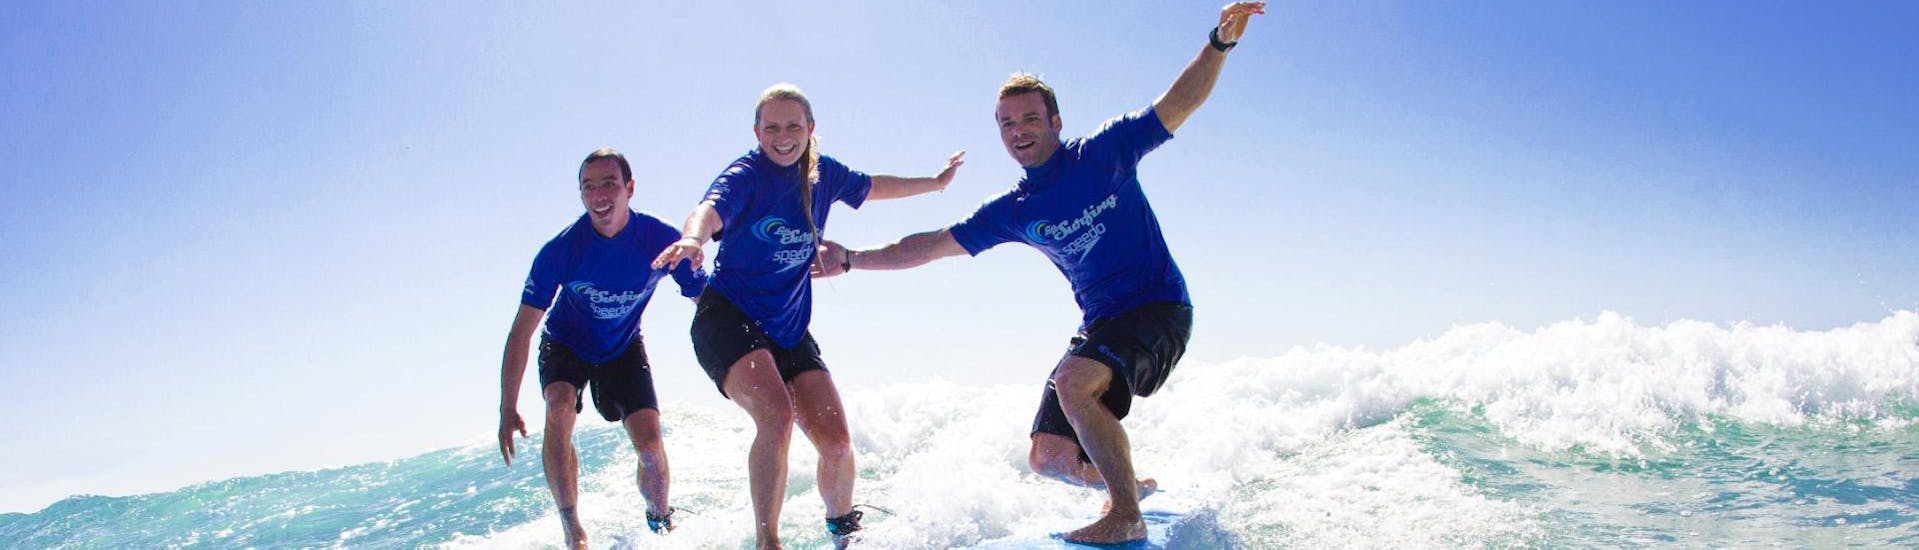 A group of friends is riding their first wave during the Surfing Lessons in Maroubra for Teens & Adults - Low Season offered by Let's Go Surfing Maroubra.